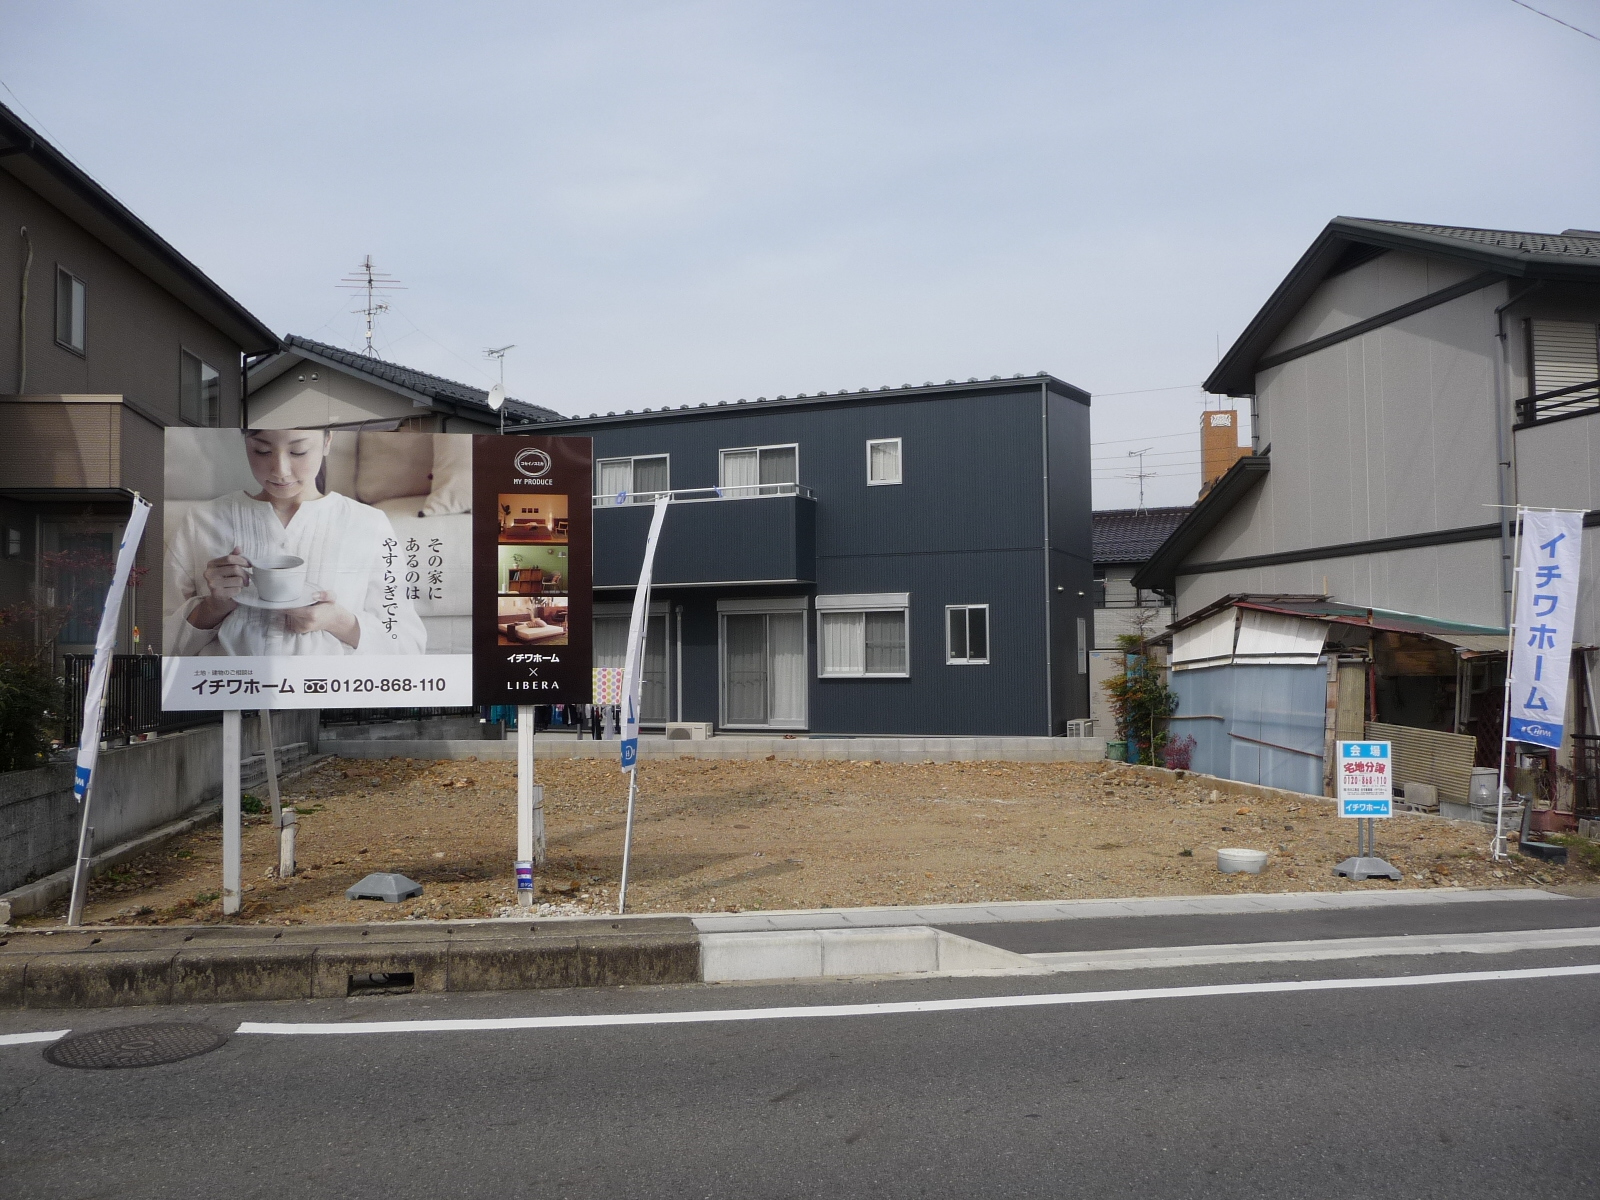 Local photos, including front road. Local nice residential area of ​​sun per facing the South (March 2011) shooting